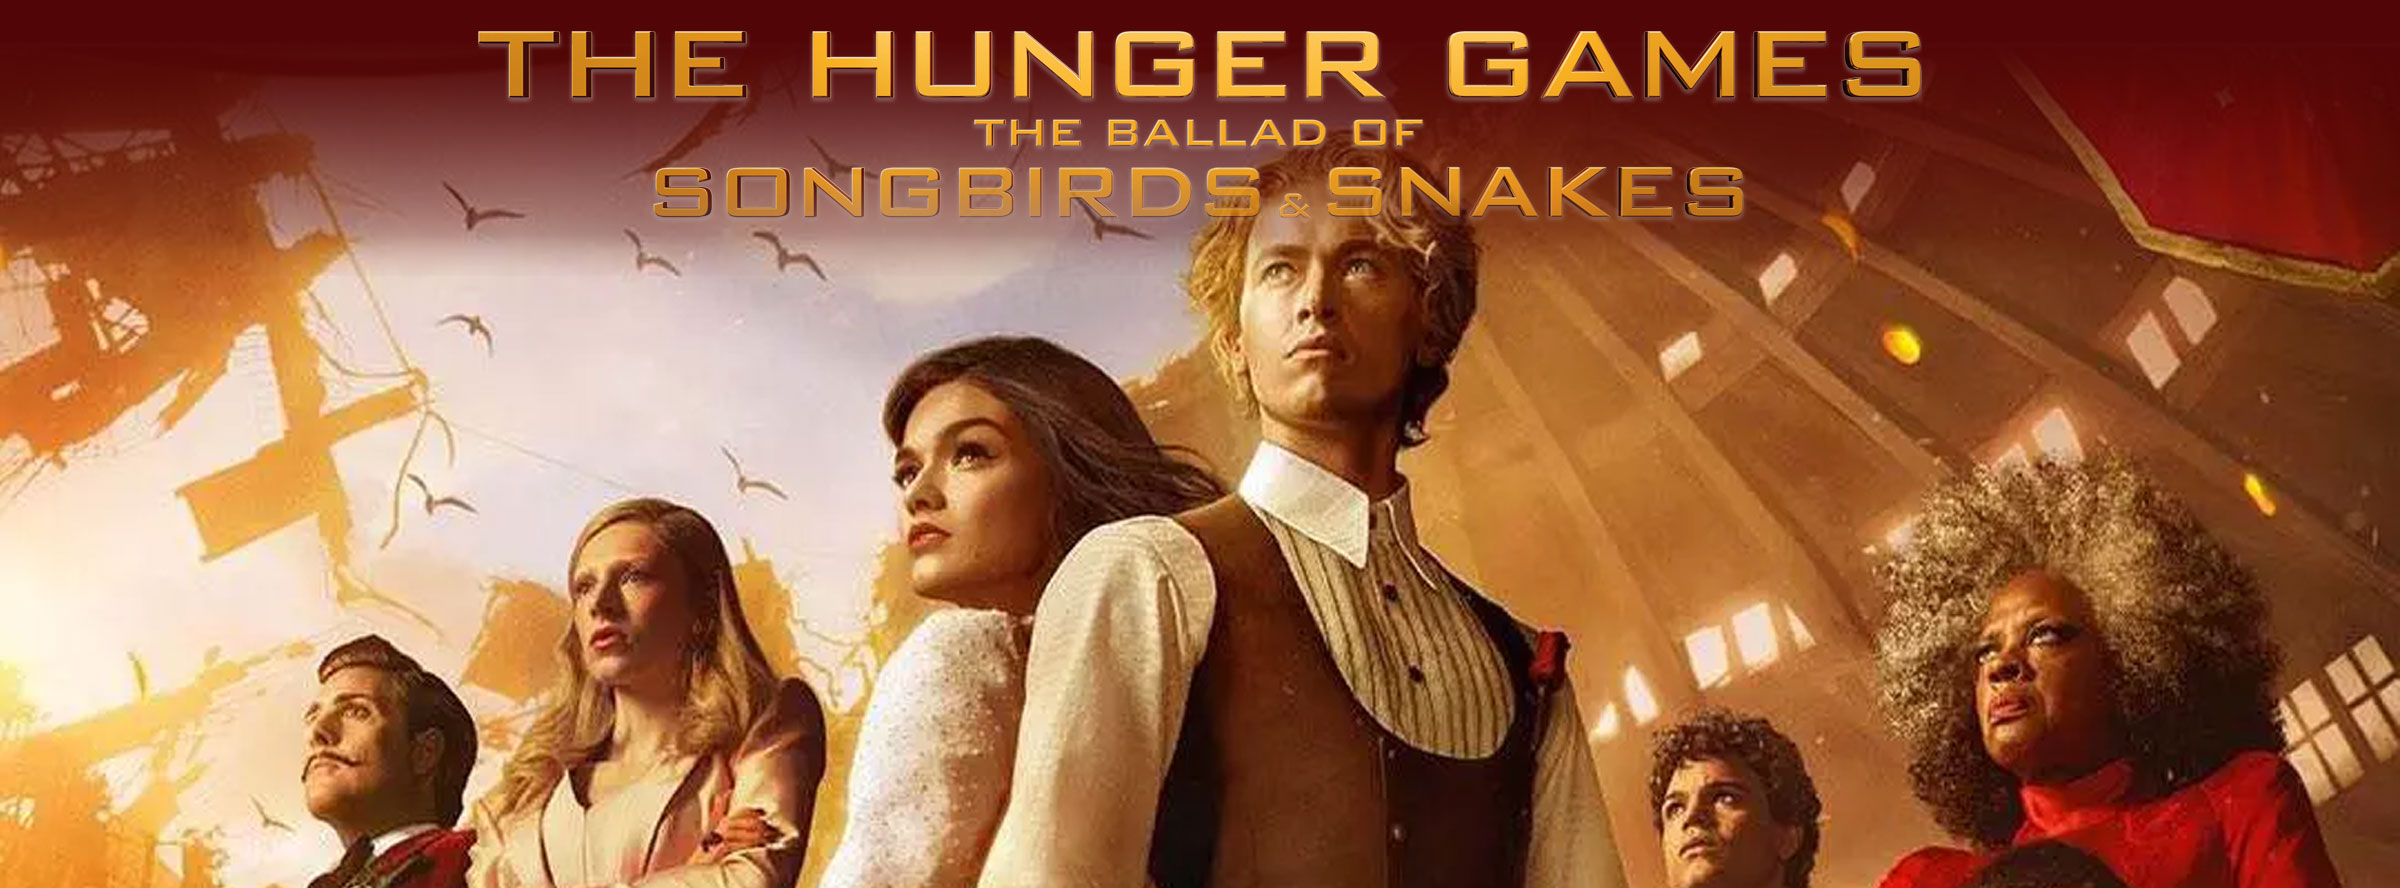 Slider Image for Hunger Games: The Ballad of Songbirds and Snakes, The                      